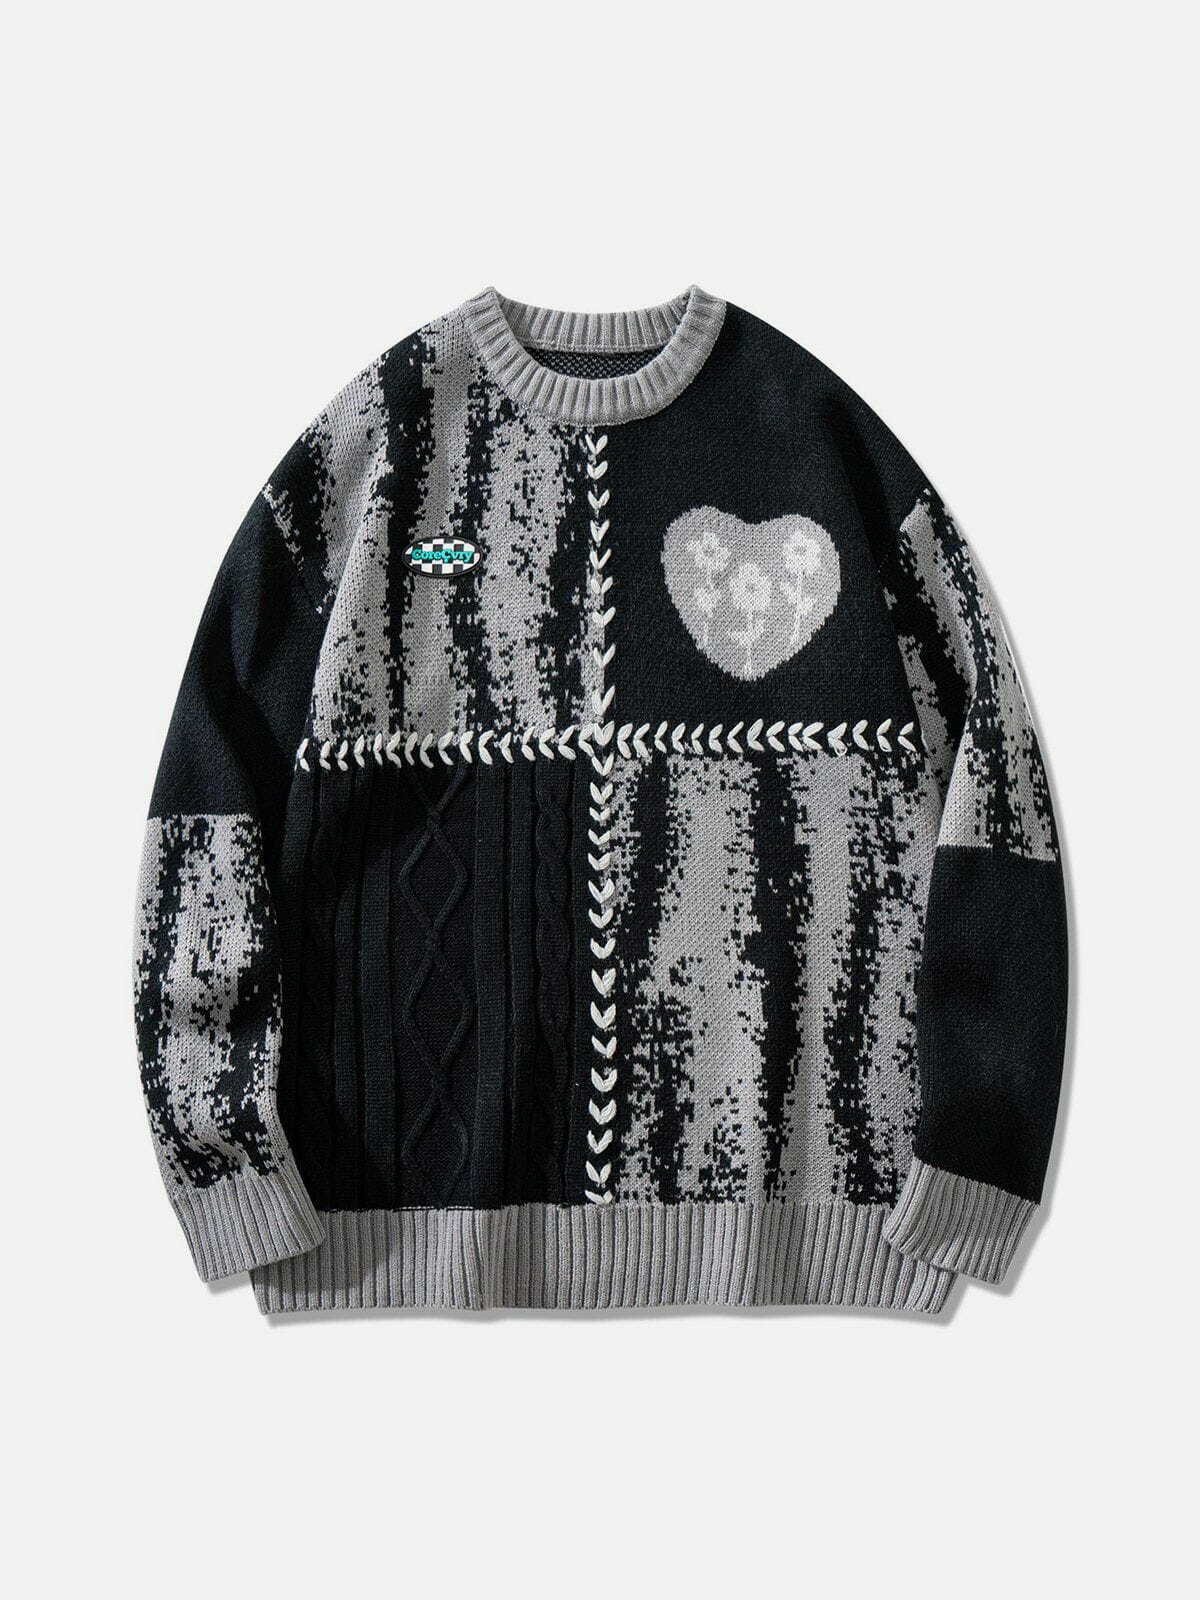 quilted heart jacquard sweater edgy streetwear essential 5323